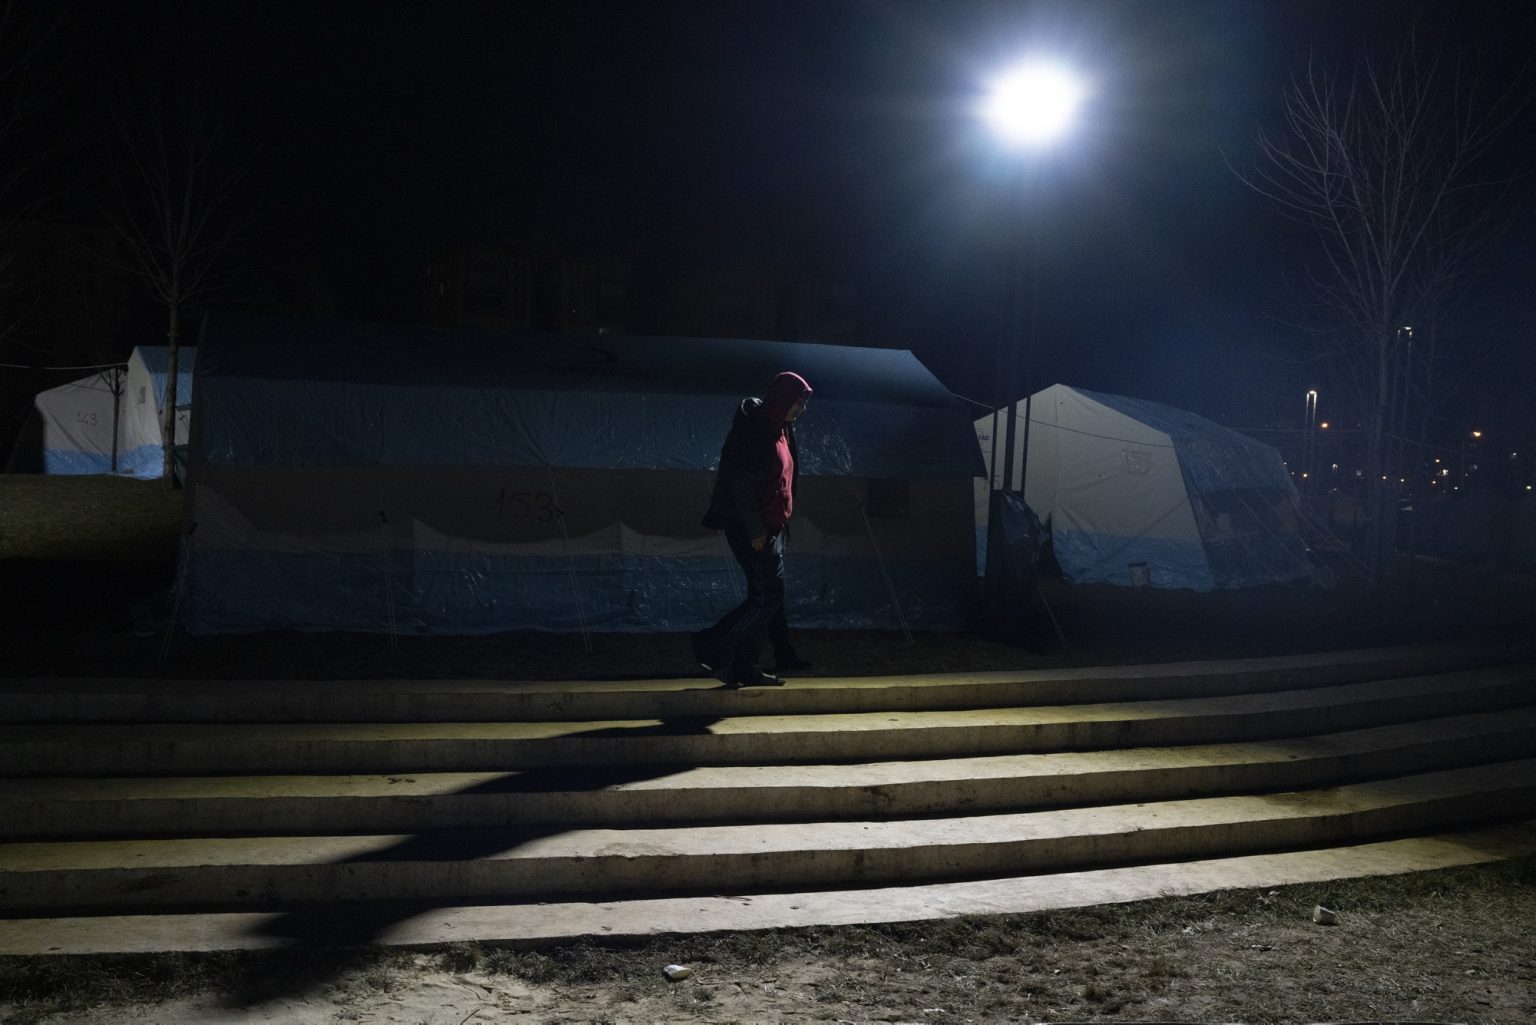 Diyarbakir, Turkey, February 2023 - The aftermath of the earthquake that hit southern Turkey and northern Syria.  A man walks inside a tent camp set up in the city of Diyarbakir. ><
Diyarbakir, Turchia, febbraio 2023  Le conseguenze del terremoto che ha colpito la Turchia del Sud e la Siria del nord.